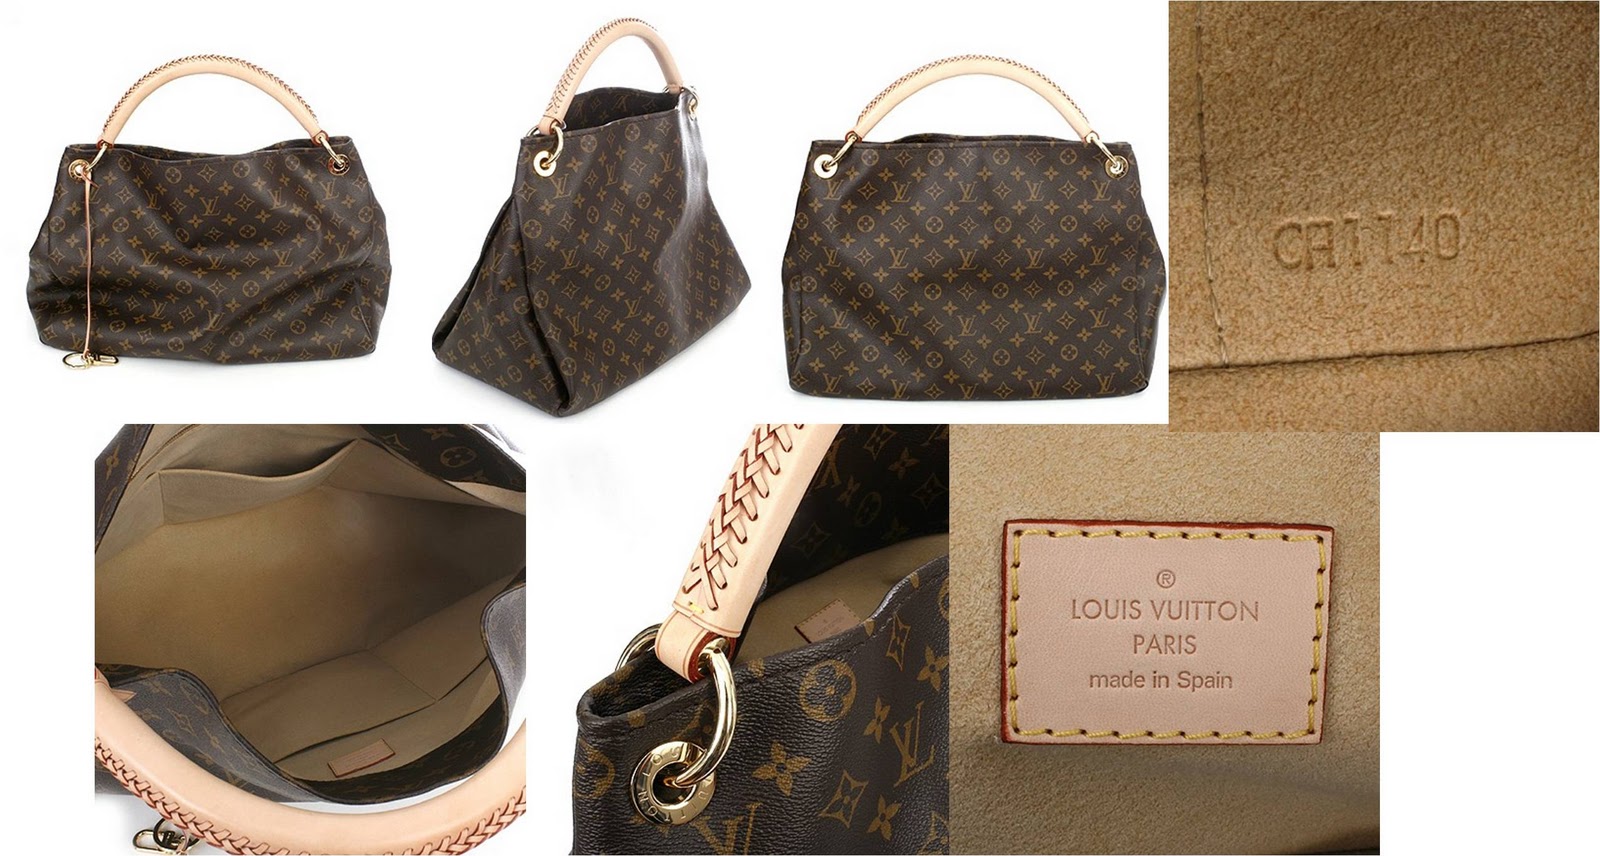 The Bags Affairs ~ Satisfy your lust for designer bags: Louis Vuitton Monogram Canvas Artsy MM ...